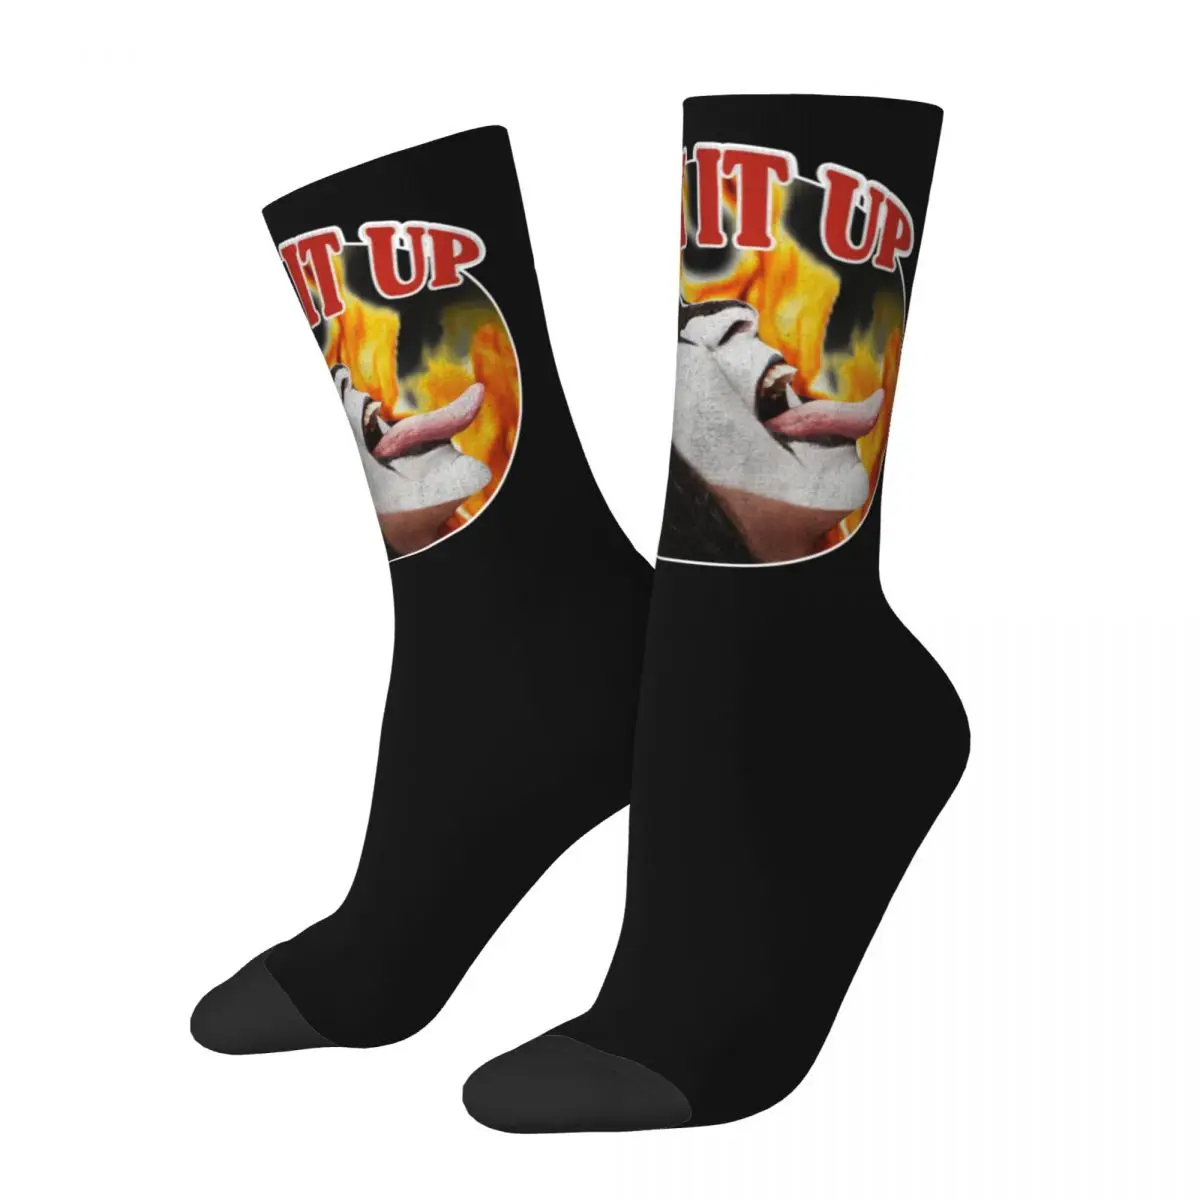 

Colorful Rock Band Kiss Demon Gene Simmons Lick It Up Sports Socks Merch Spring Autumn Winter Soft Middle Tube Socks Breathable